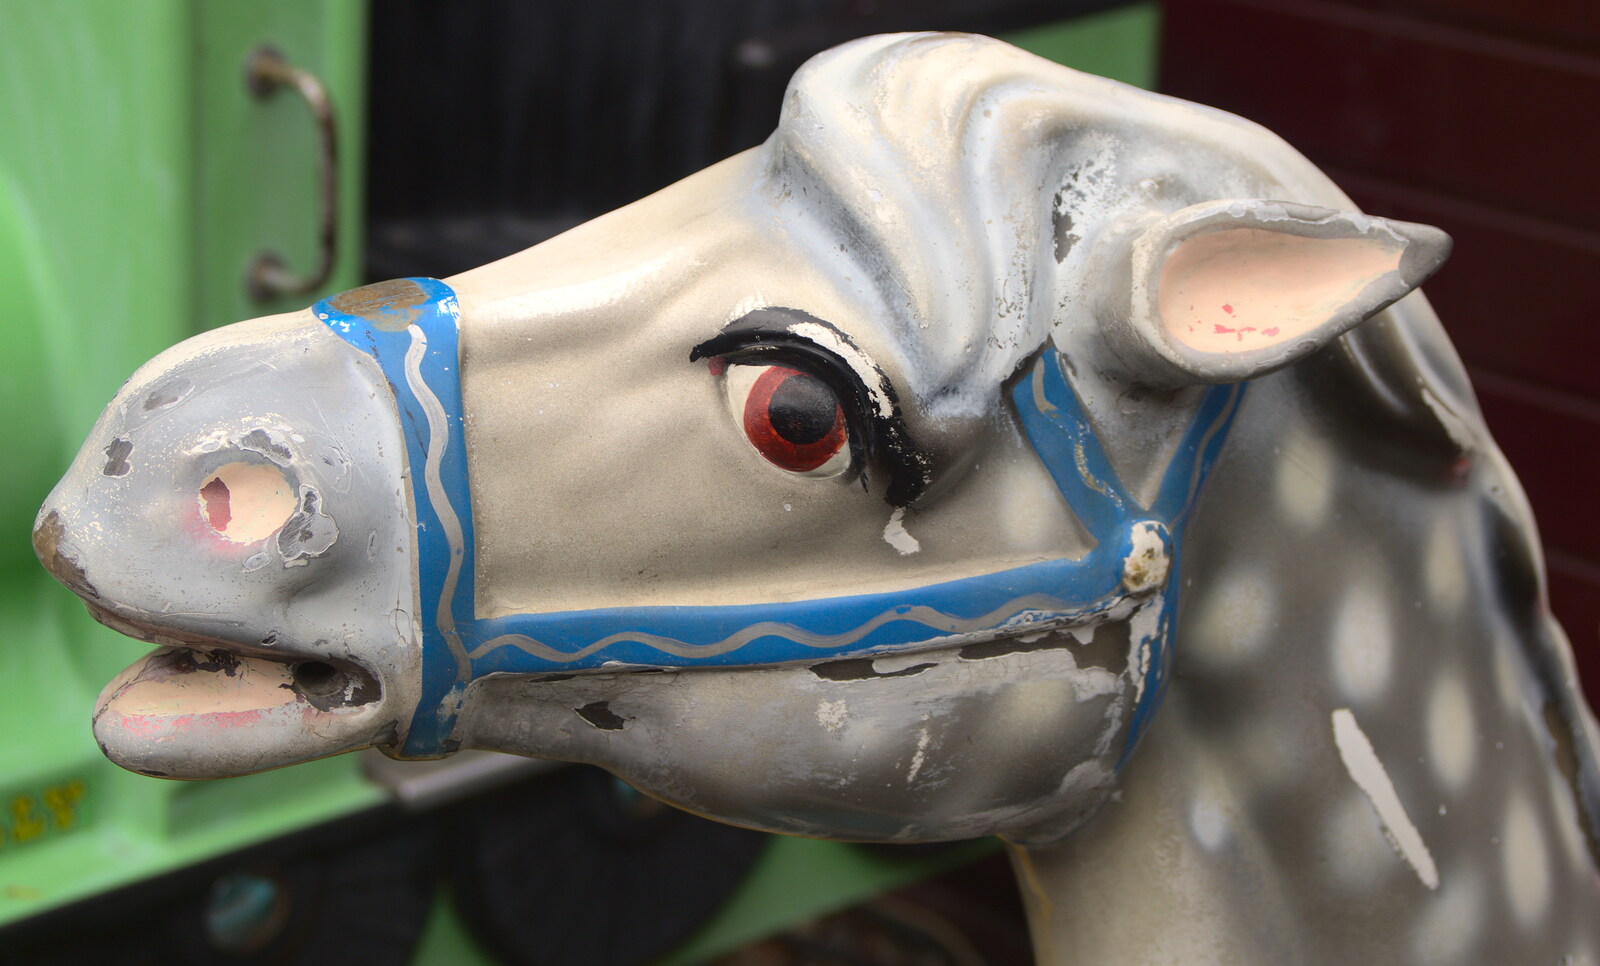 A sad-looking wooden horse from A Day at Bressingham Steam and Gardens, Diss, Norfolk - 18th May 2013